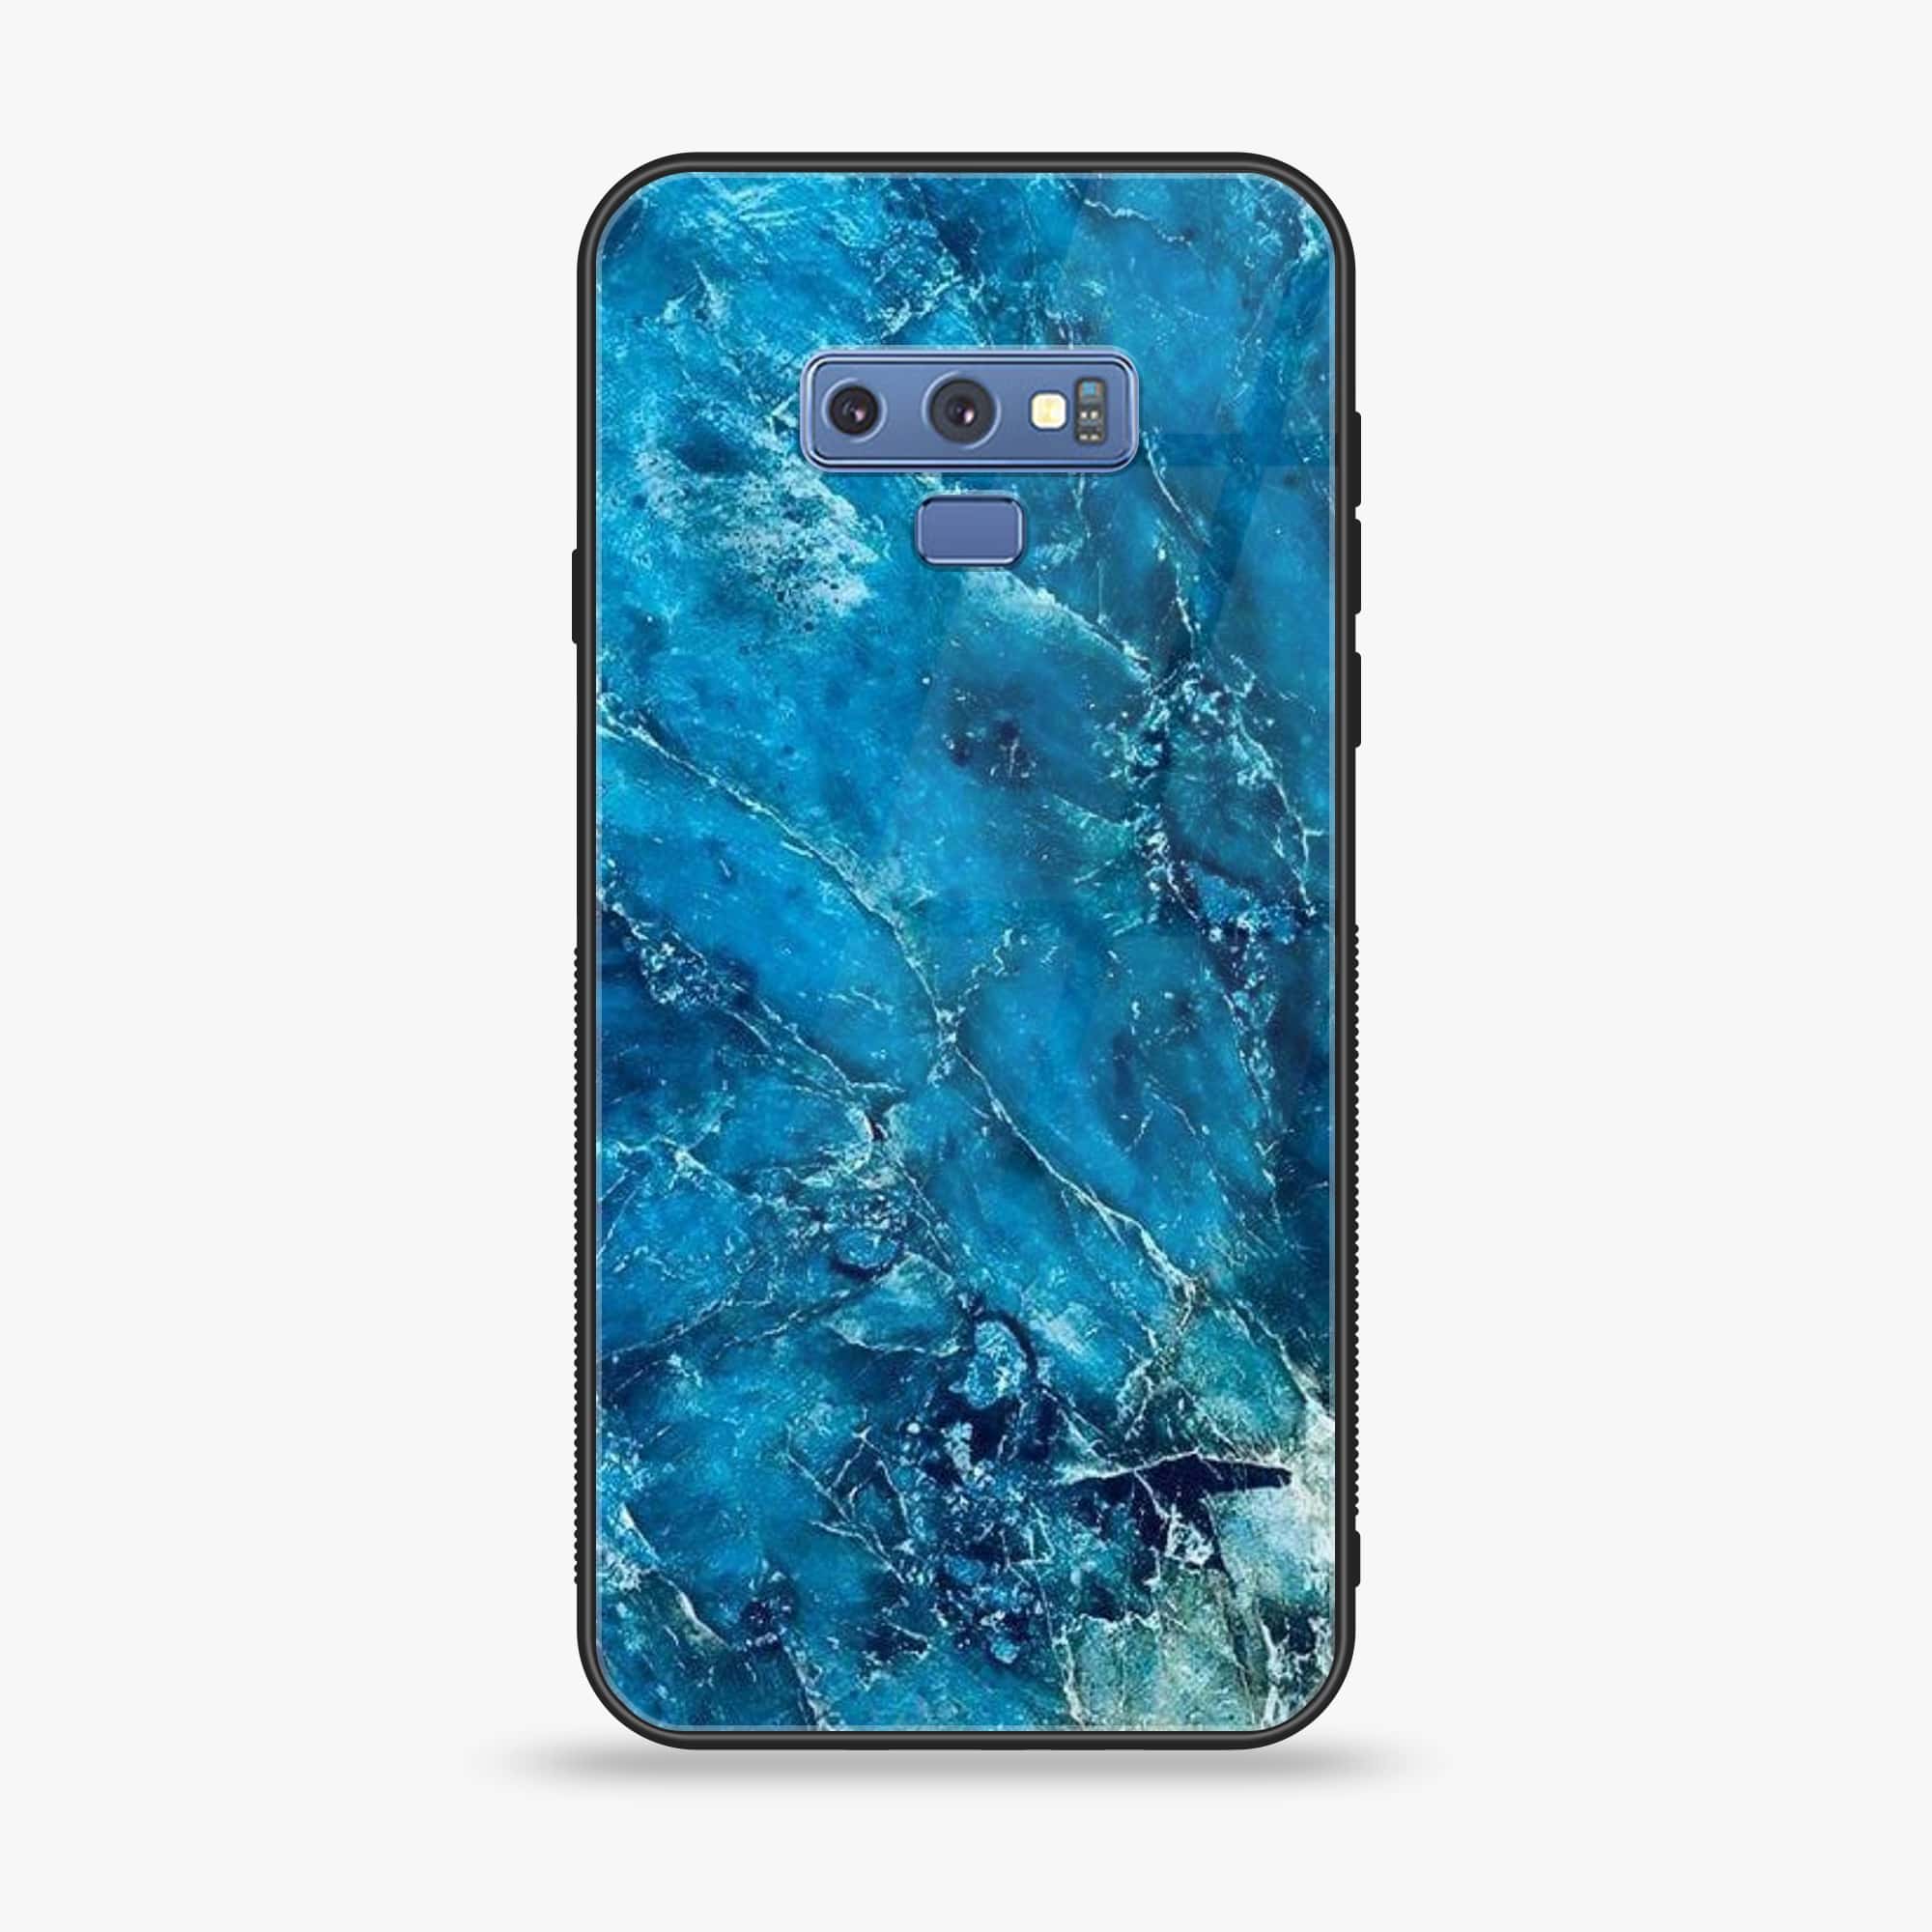 Samsung Galaxy Note 9 - Blue Marble Series V 2.0 - Premium Printed Glass soft Bumper shock Proof Case